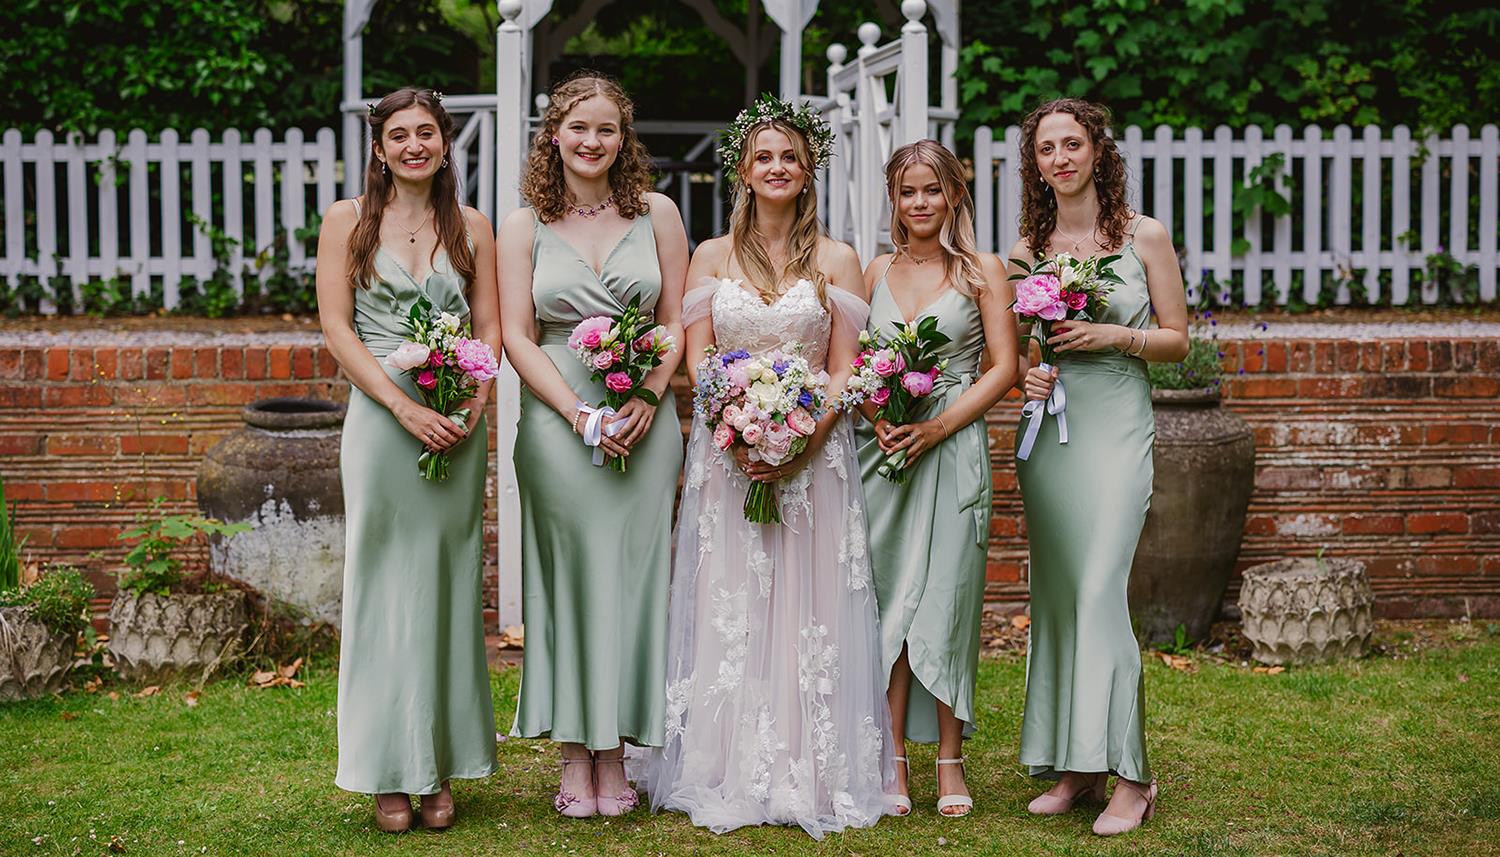 Bride with bridesmaids. Photo Credit: Philip Quinnell Photography